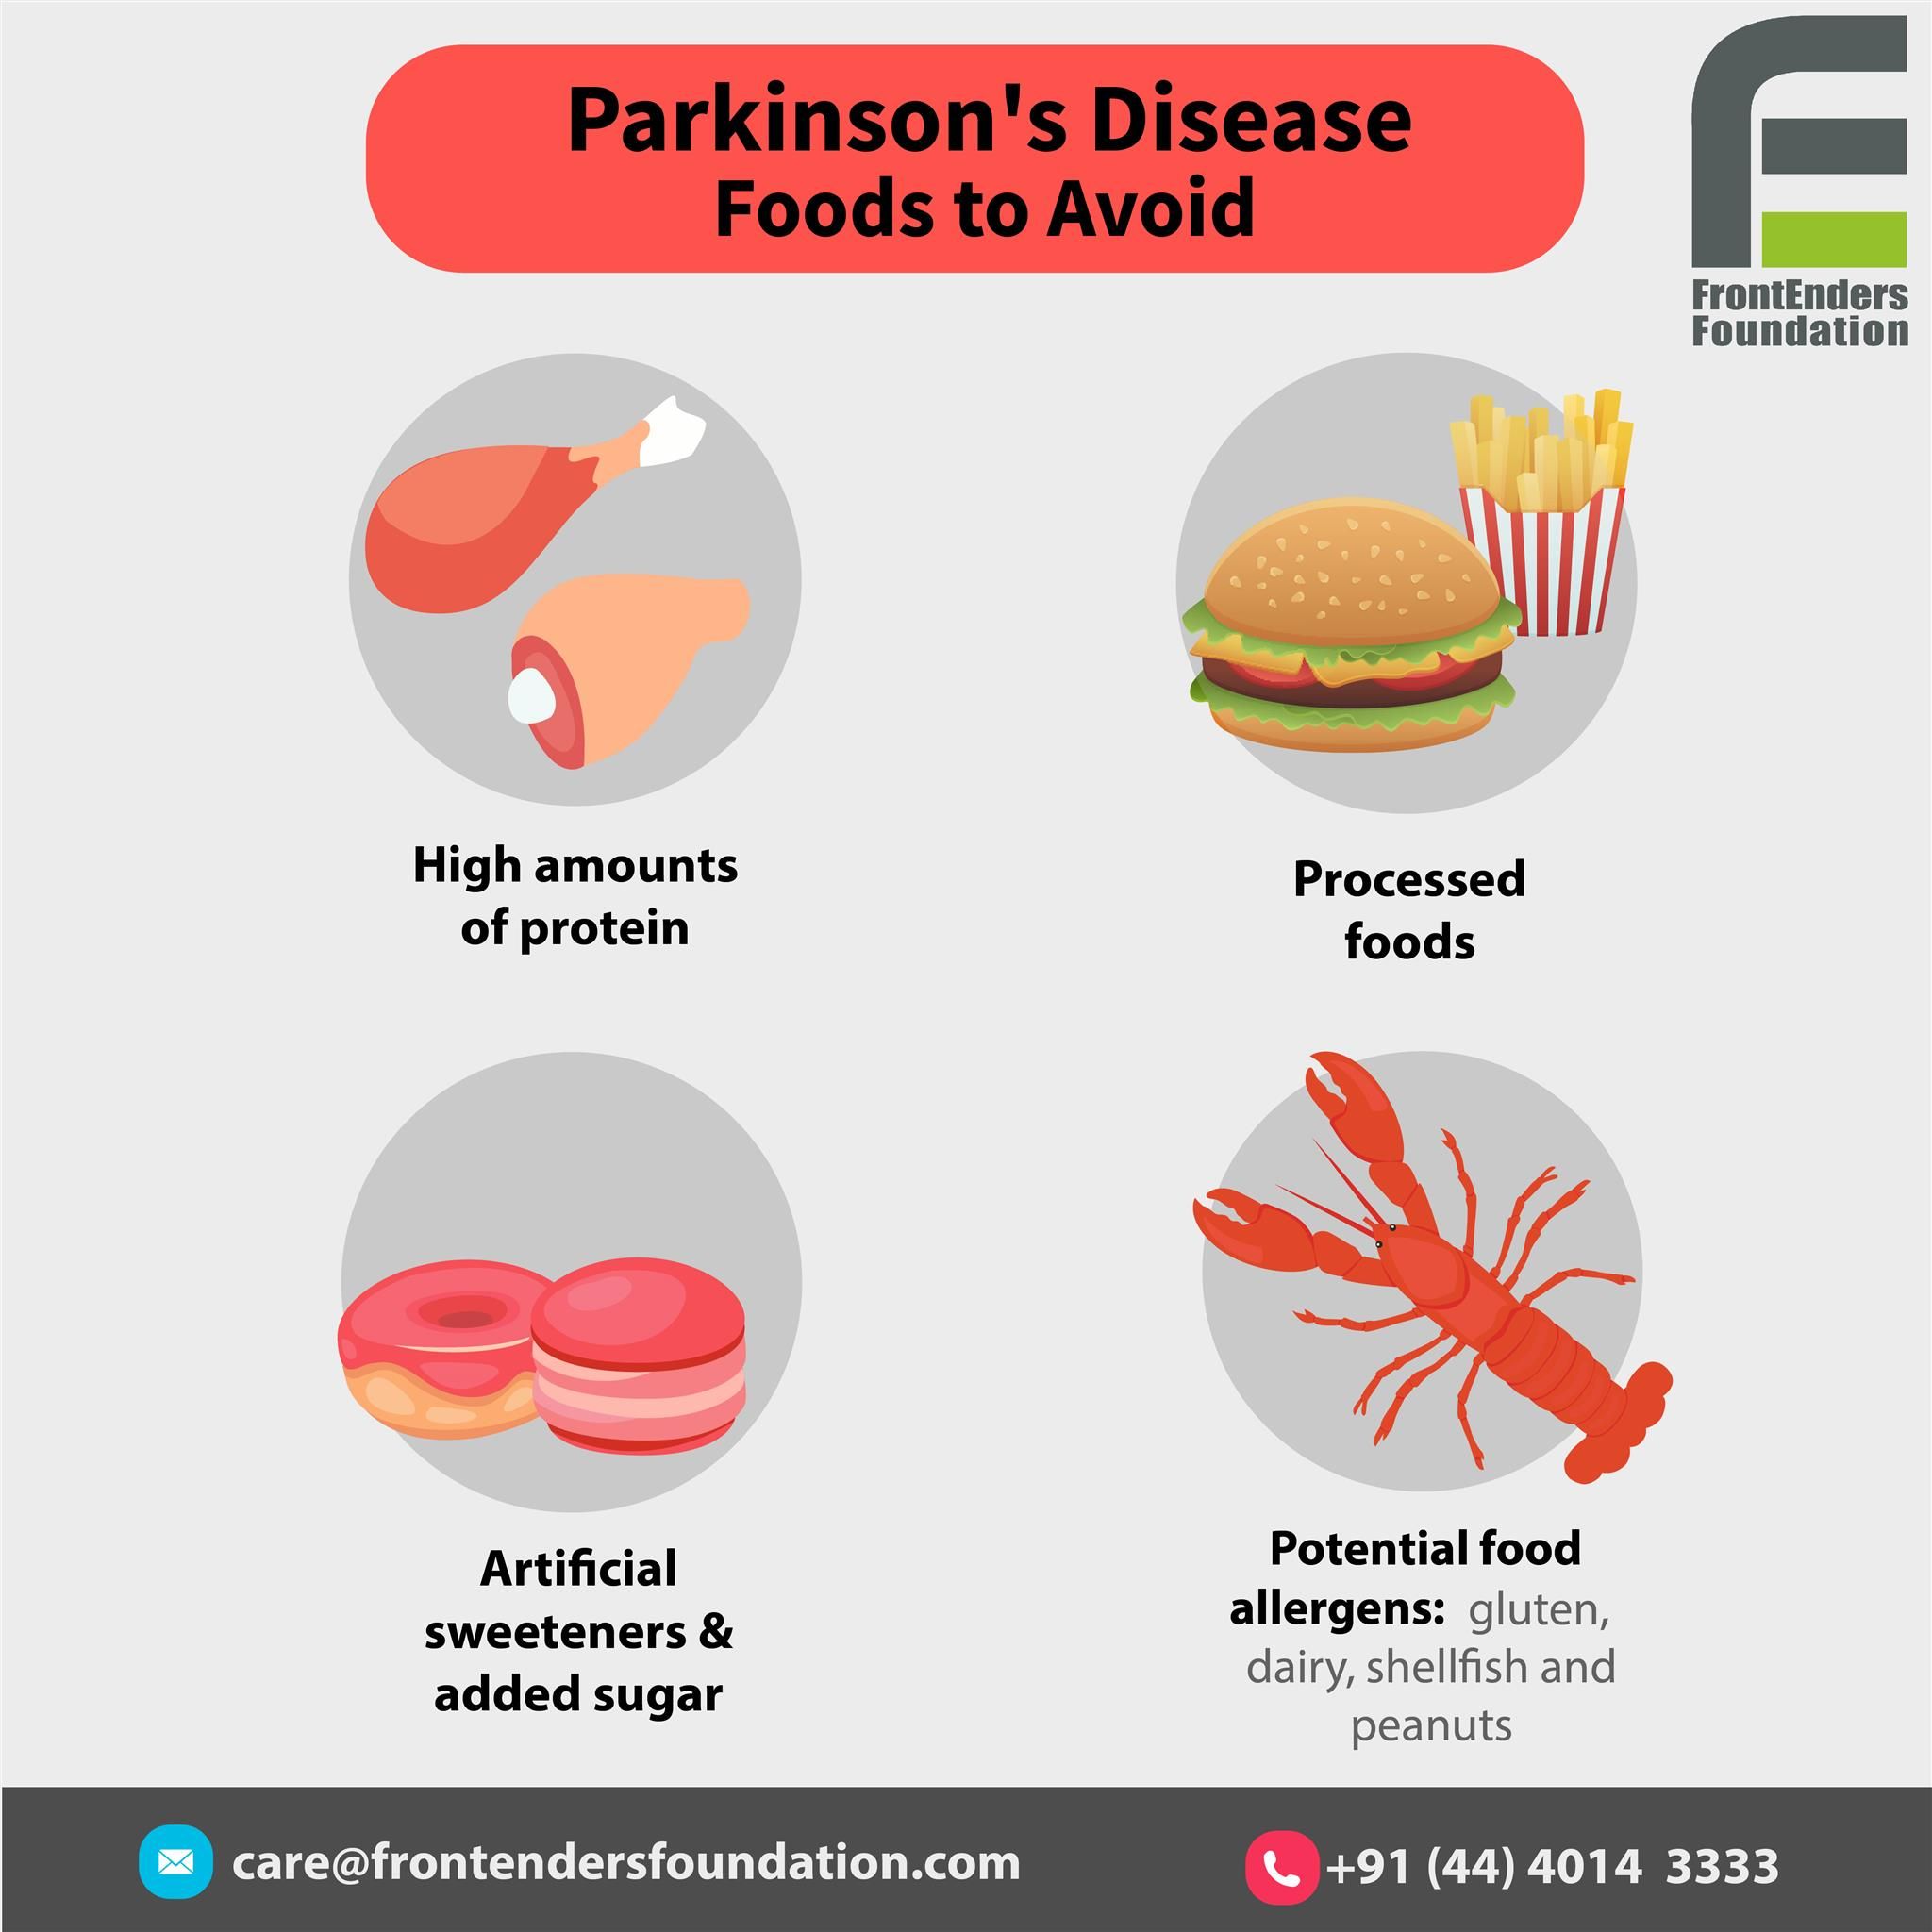 Avoid these foods to prevent the #Parkinson